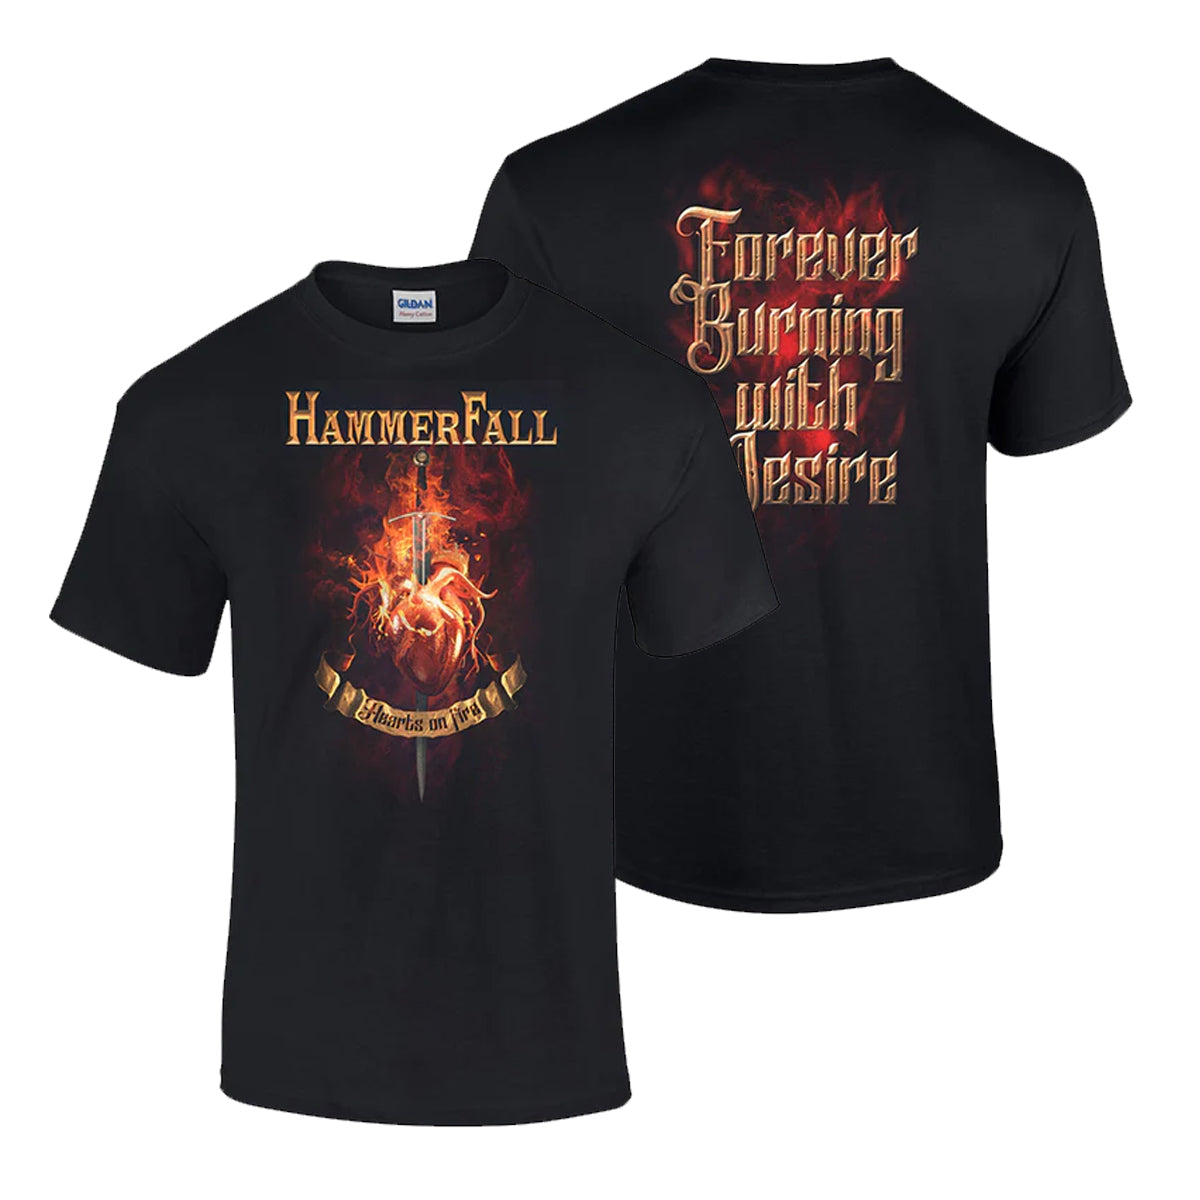 Hearts on Fire T-Shirt